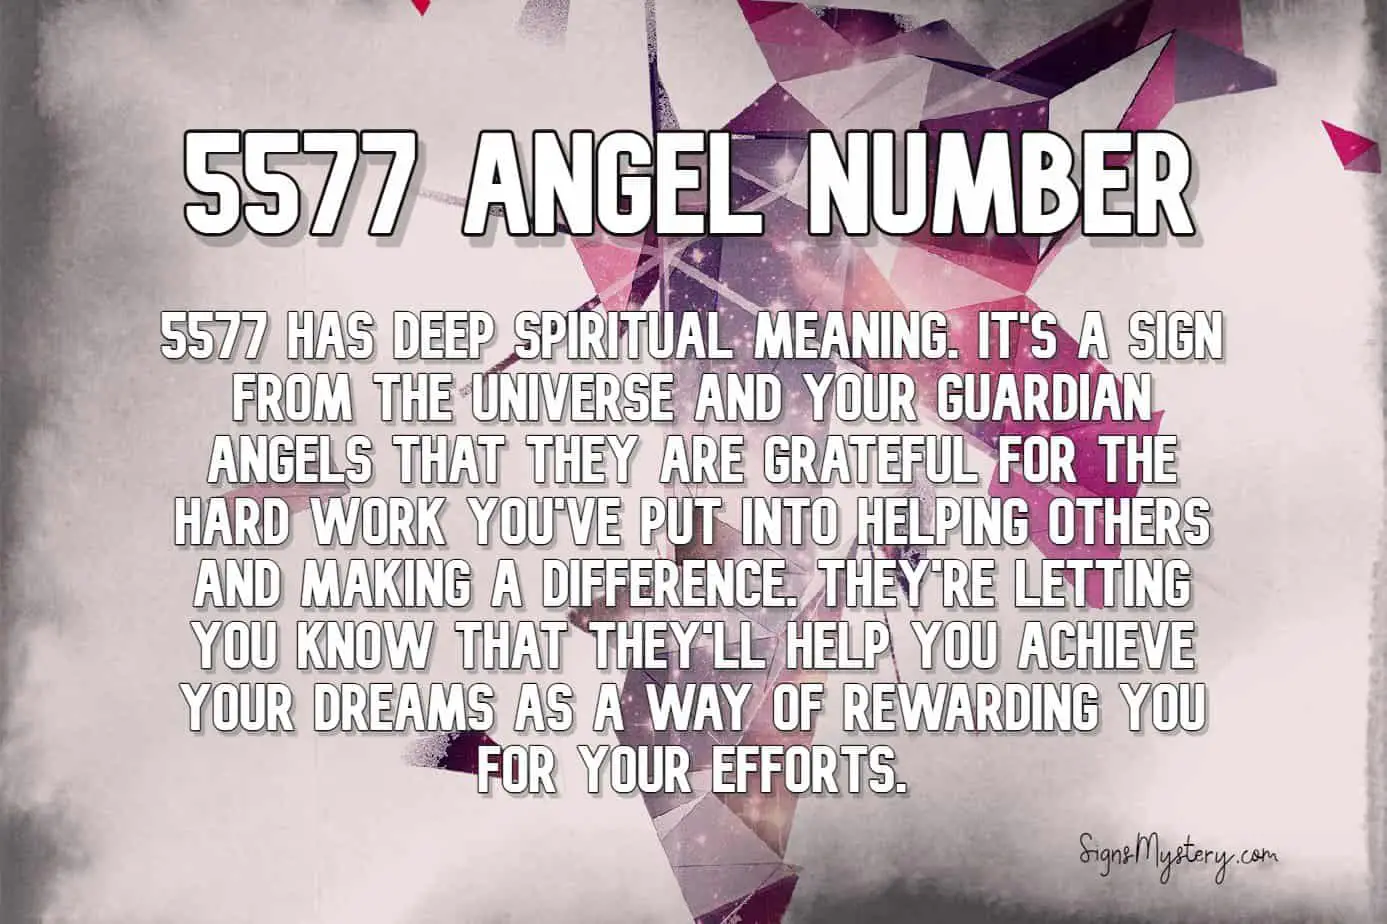 5577 angel number meaning